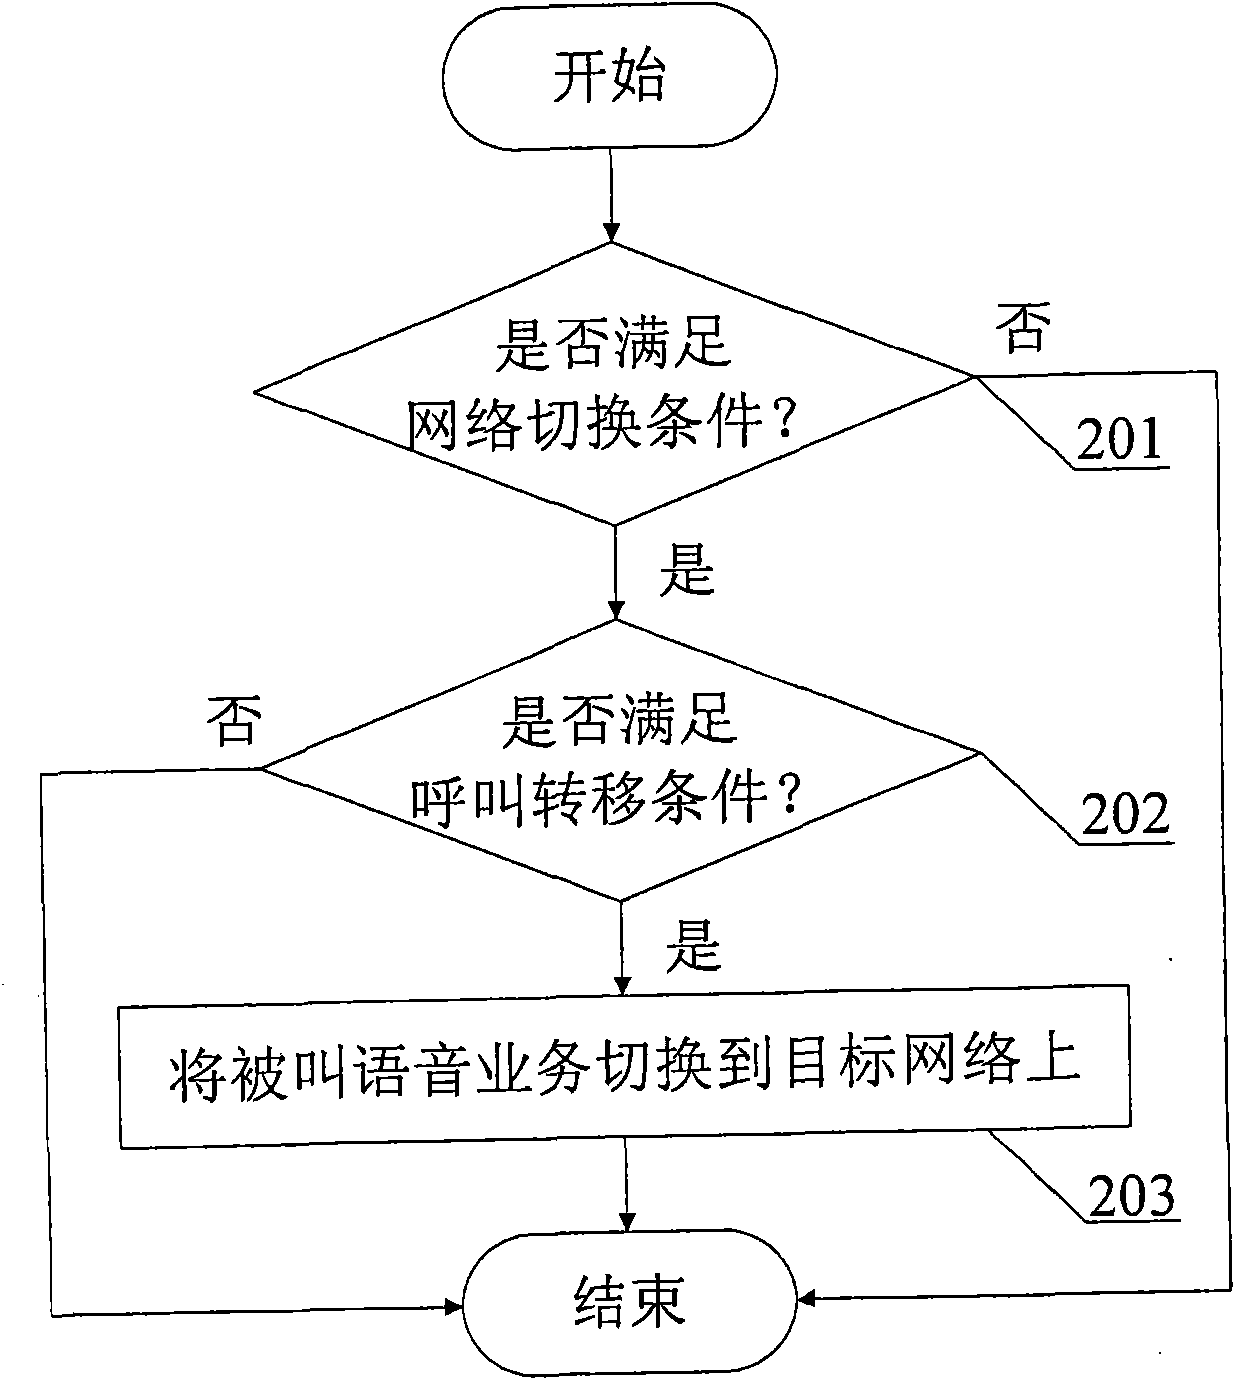 Method and system for switching a called voice service